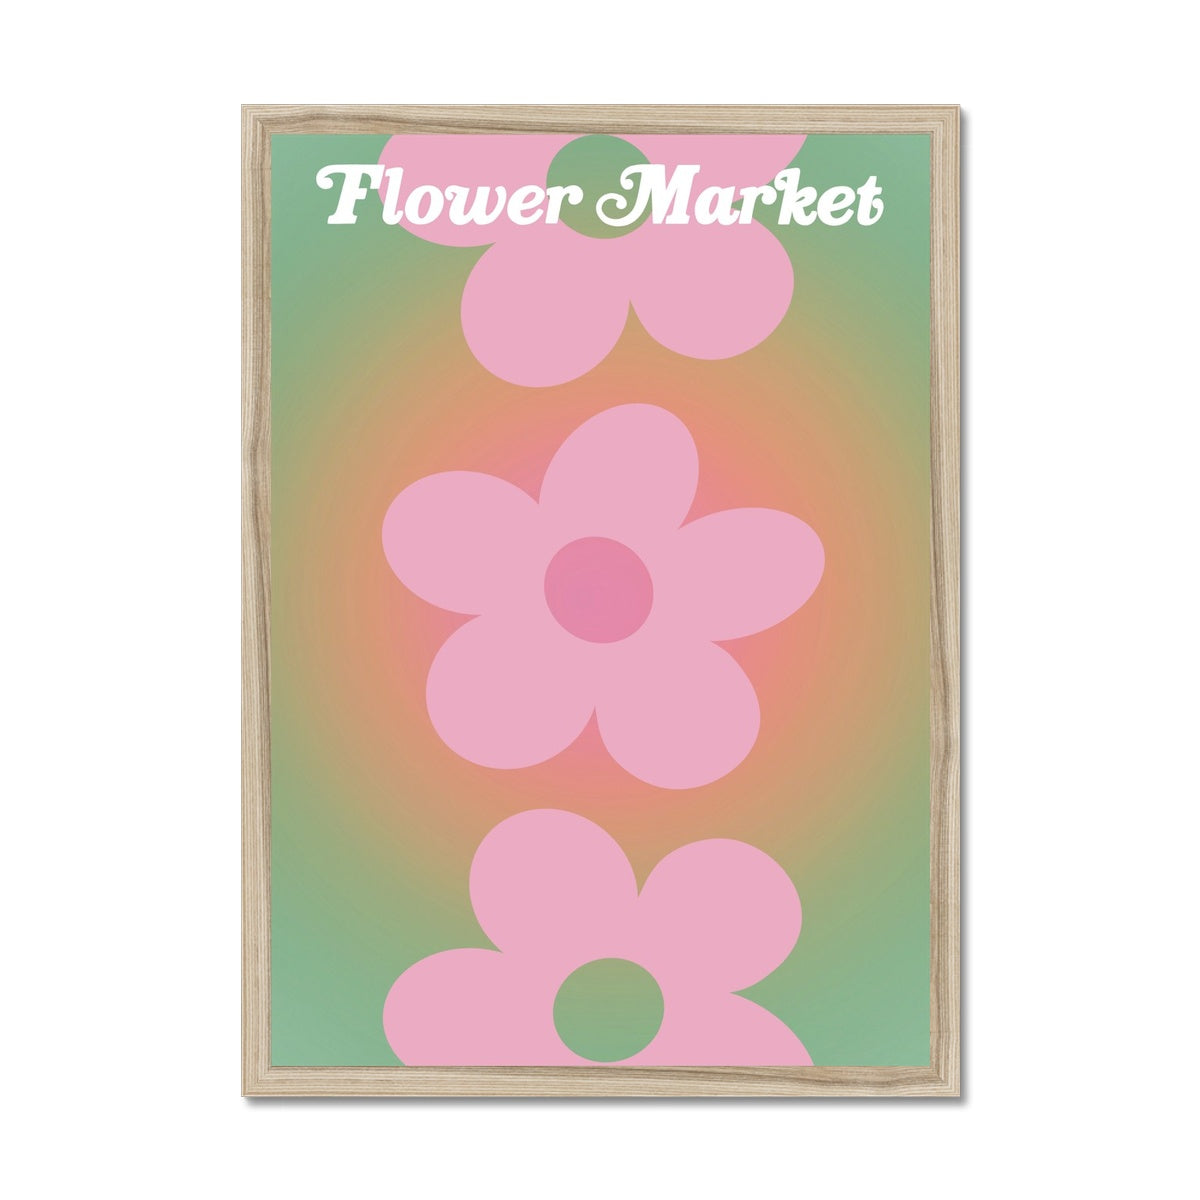 © les muses / Our Flower Market / Triple Daisy collection features wall art with daisies under original hand drawn typography. The aesthetic art print, featuring a retro daisy design, brightens up any gallery wall. The danish pastel style poster comes in dreamy pastel and gradient colors.